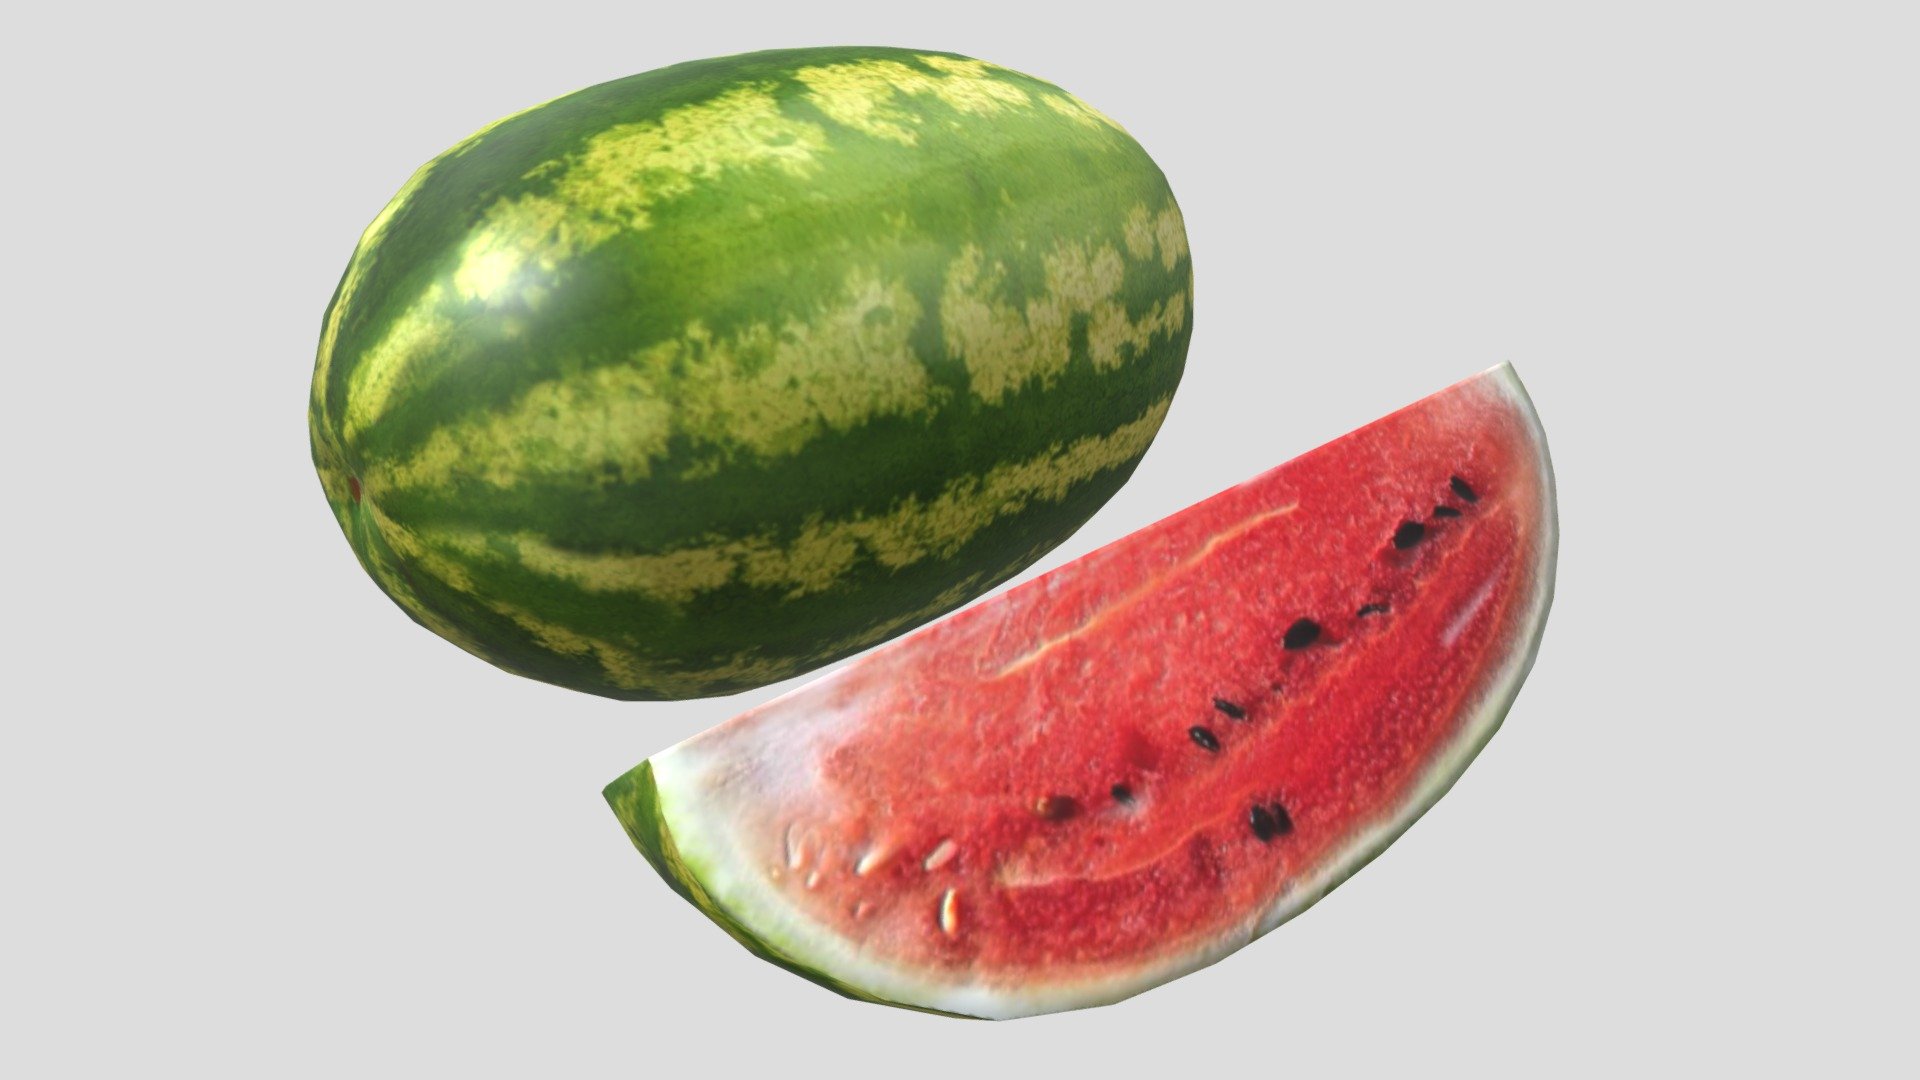 3d model of a Watermelon. Perfect for games, scenes or renders.

Model is correctly divided into main parts. All main parts are presented as separate parts therefore materials of objects are easy to be modified or removed and standard parts are easy to be replaced.

TEXTURES: Models includes high textures with maps: Base Color (.png) Height (.png) Metallic (.png) Normal (.png) Roughness (.png)

FORMATS: .obj .dae .stl .blend .fbx .3ds

GENERAL: Easy editable. Model is fully textured.

Vertices: 976 Polygons: 972

All formats have been tested and work correctly.

Some files may need textures or materials adjusted or added depending on the program they are imported into 3d model